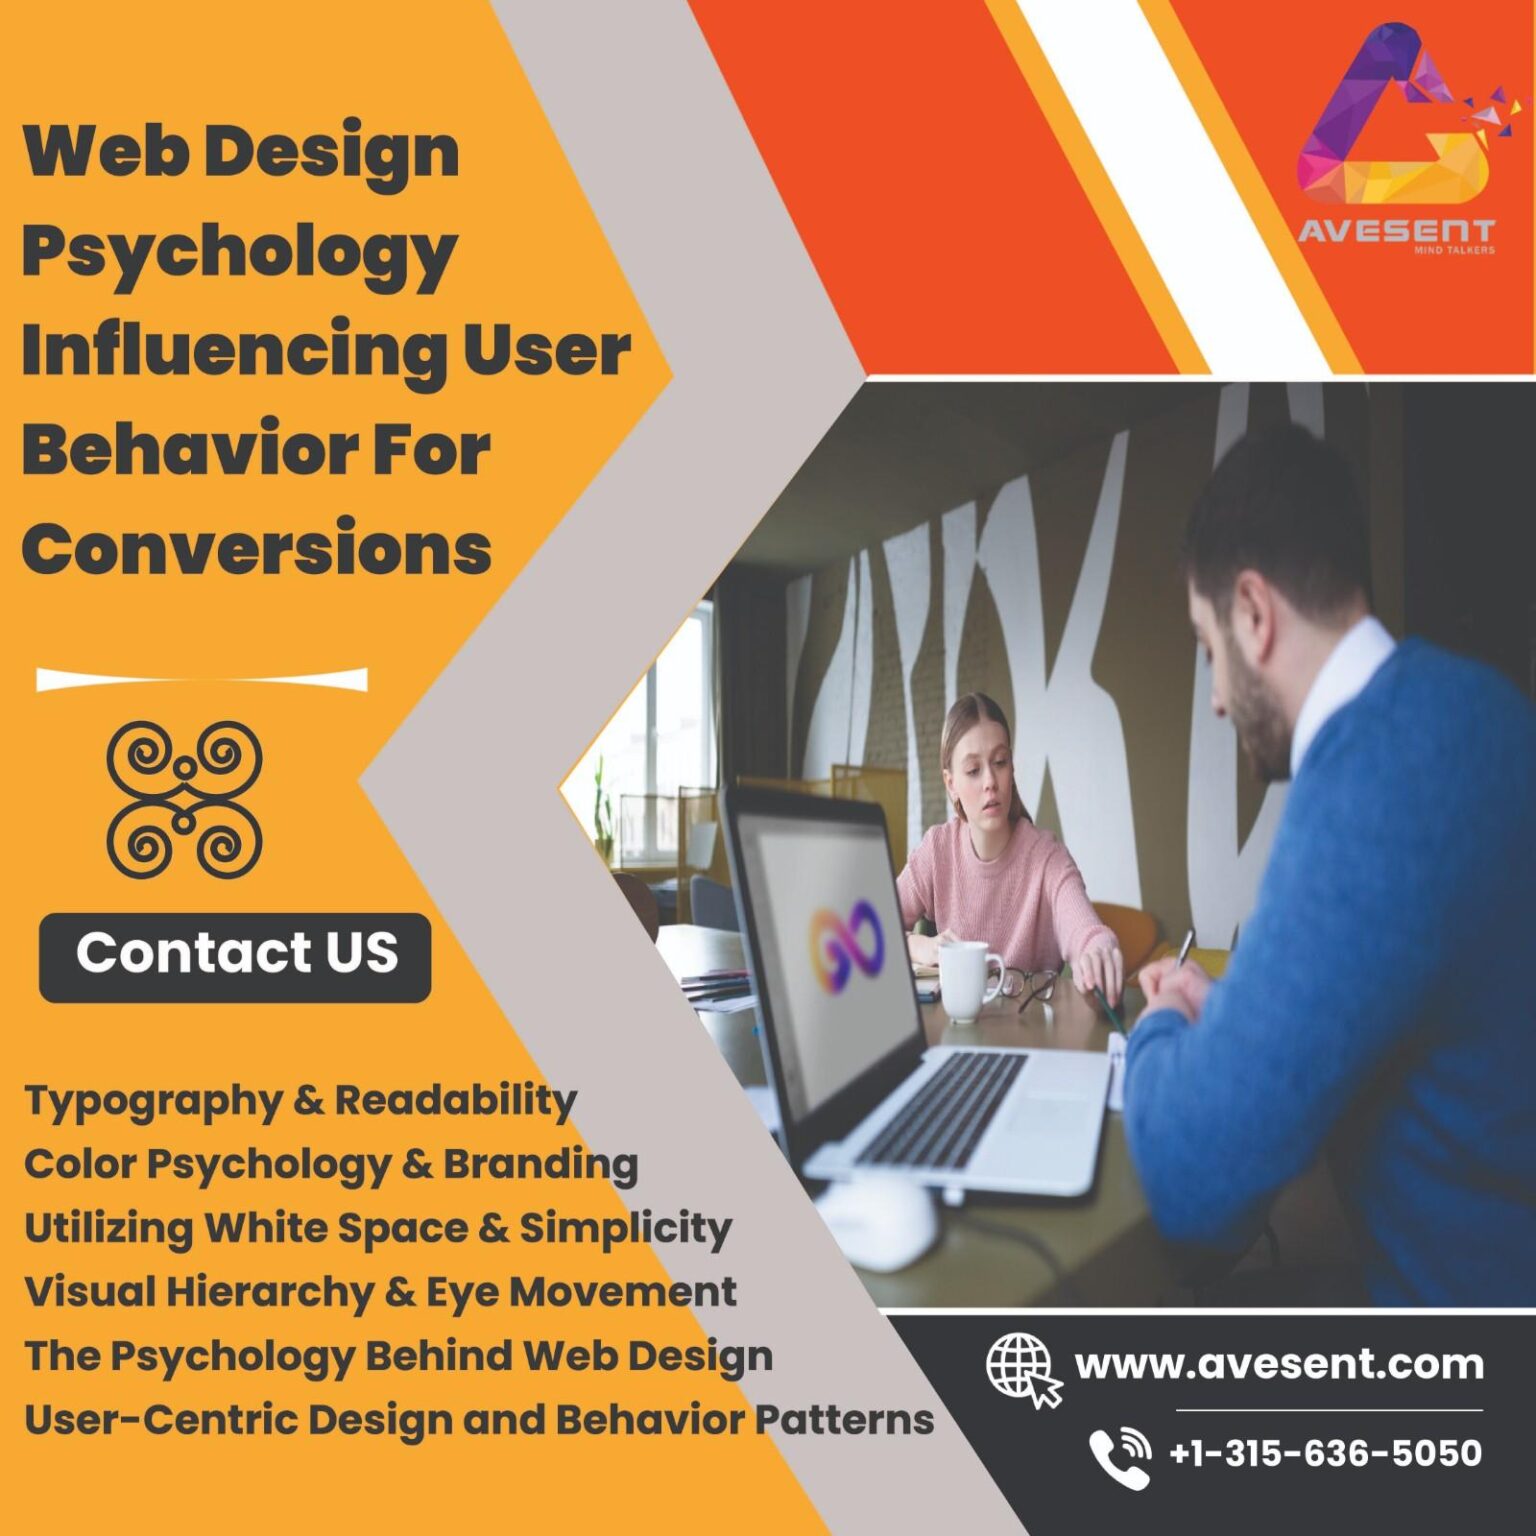 You are currently viewing Web Design Psychology Influencing User Behavior for Conversions